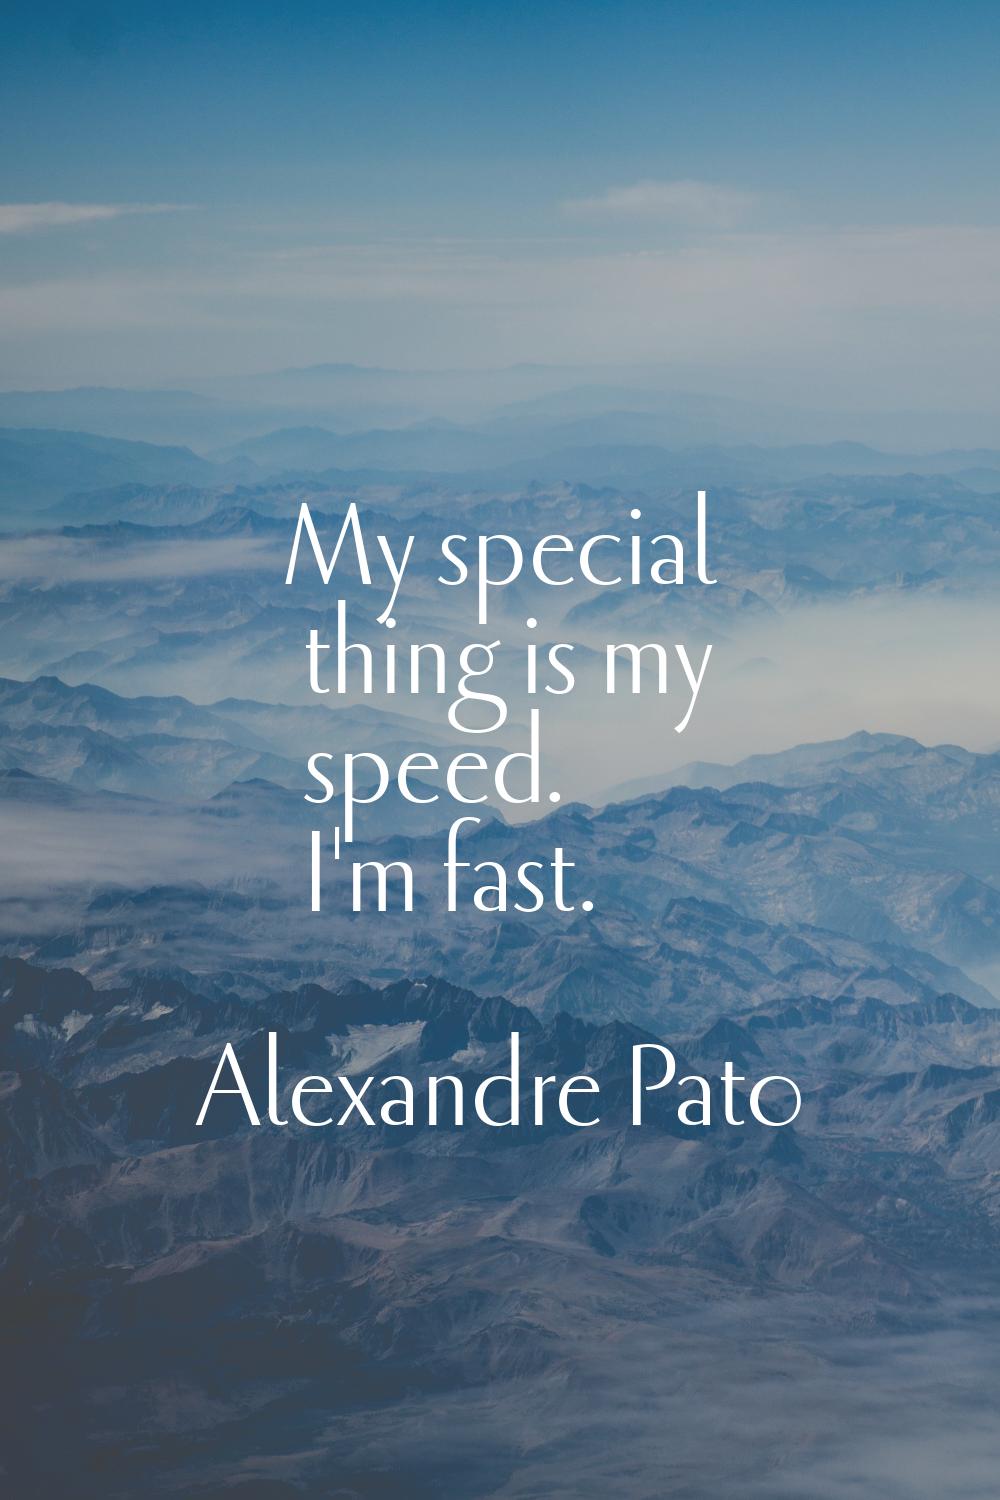 My special thing is my speed. I'm fast.